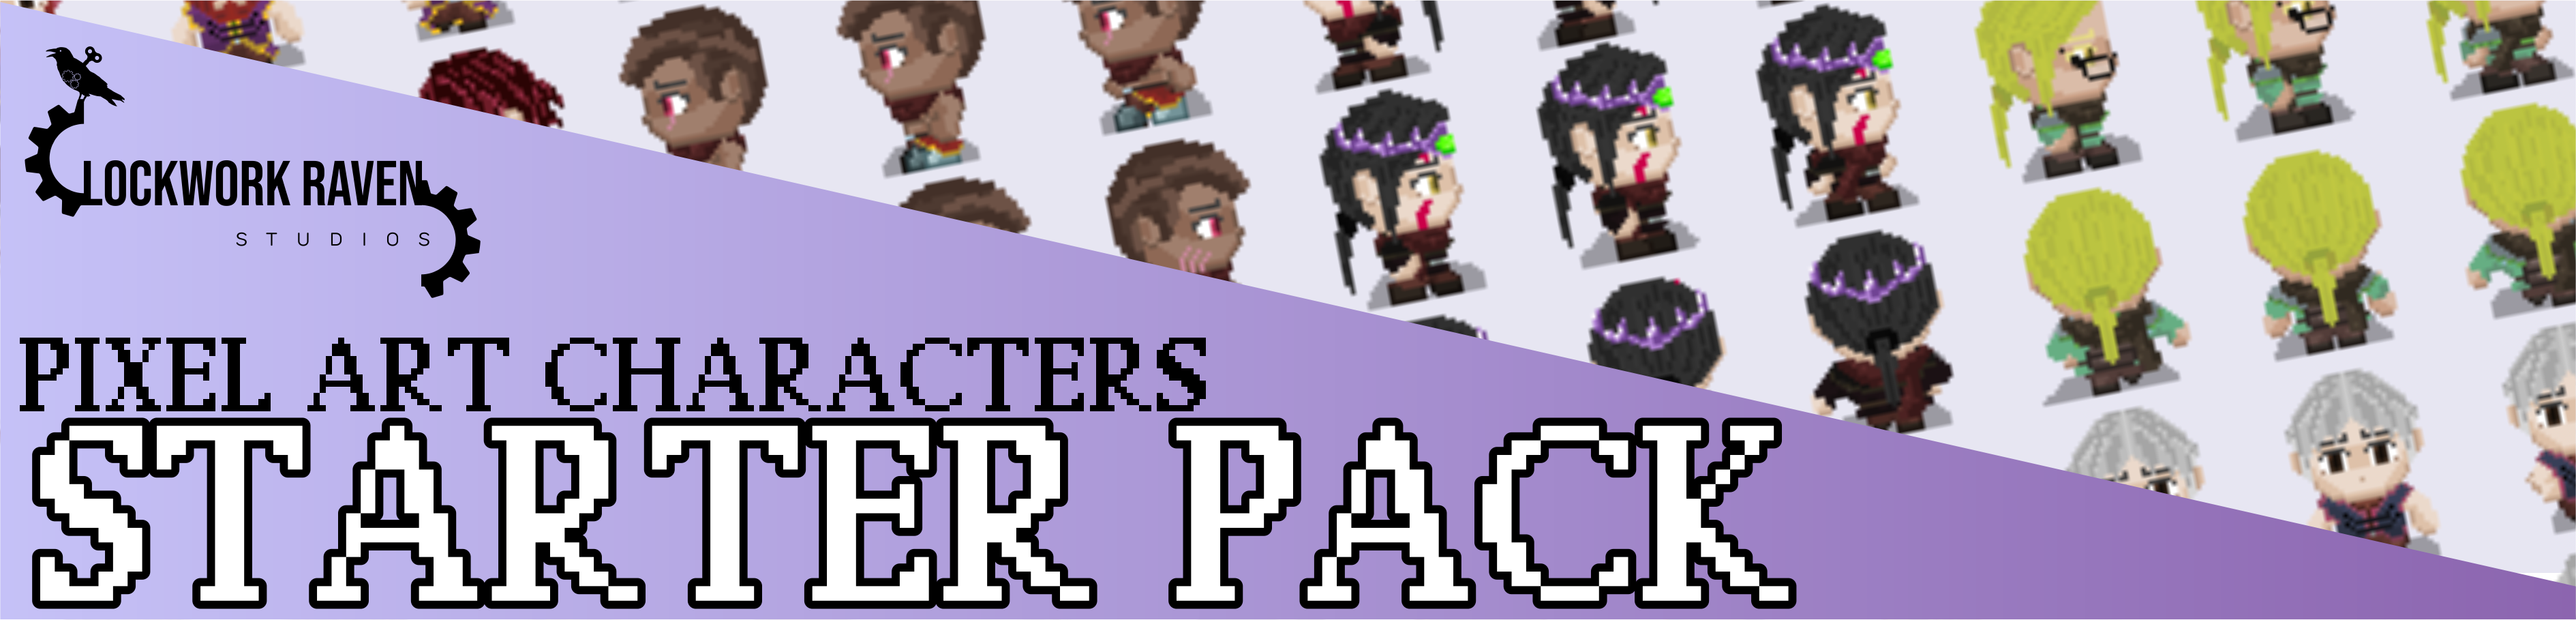 FREE Pixel Art Characters - Starter Pack